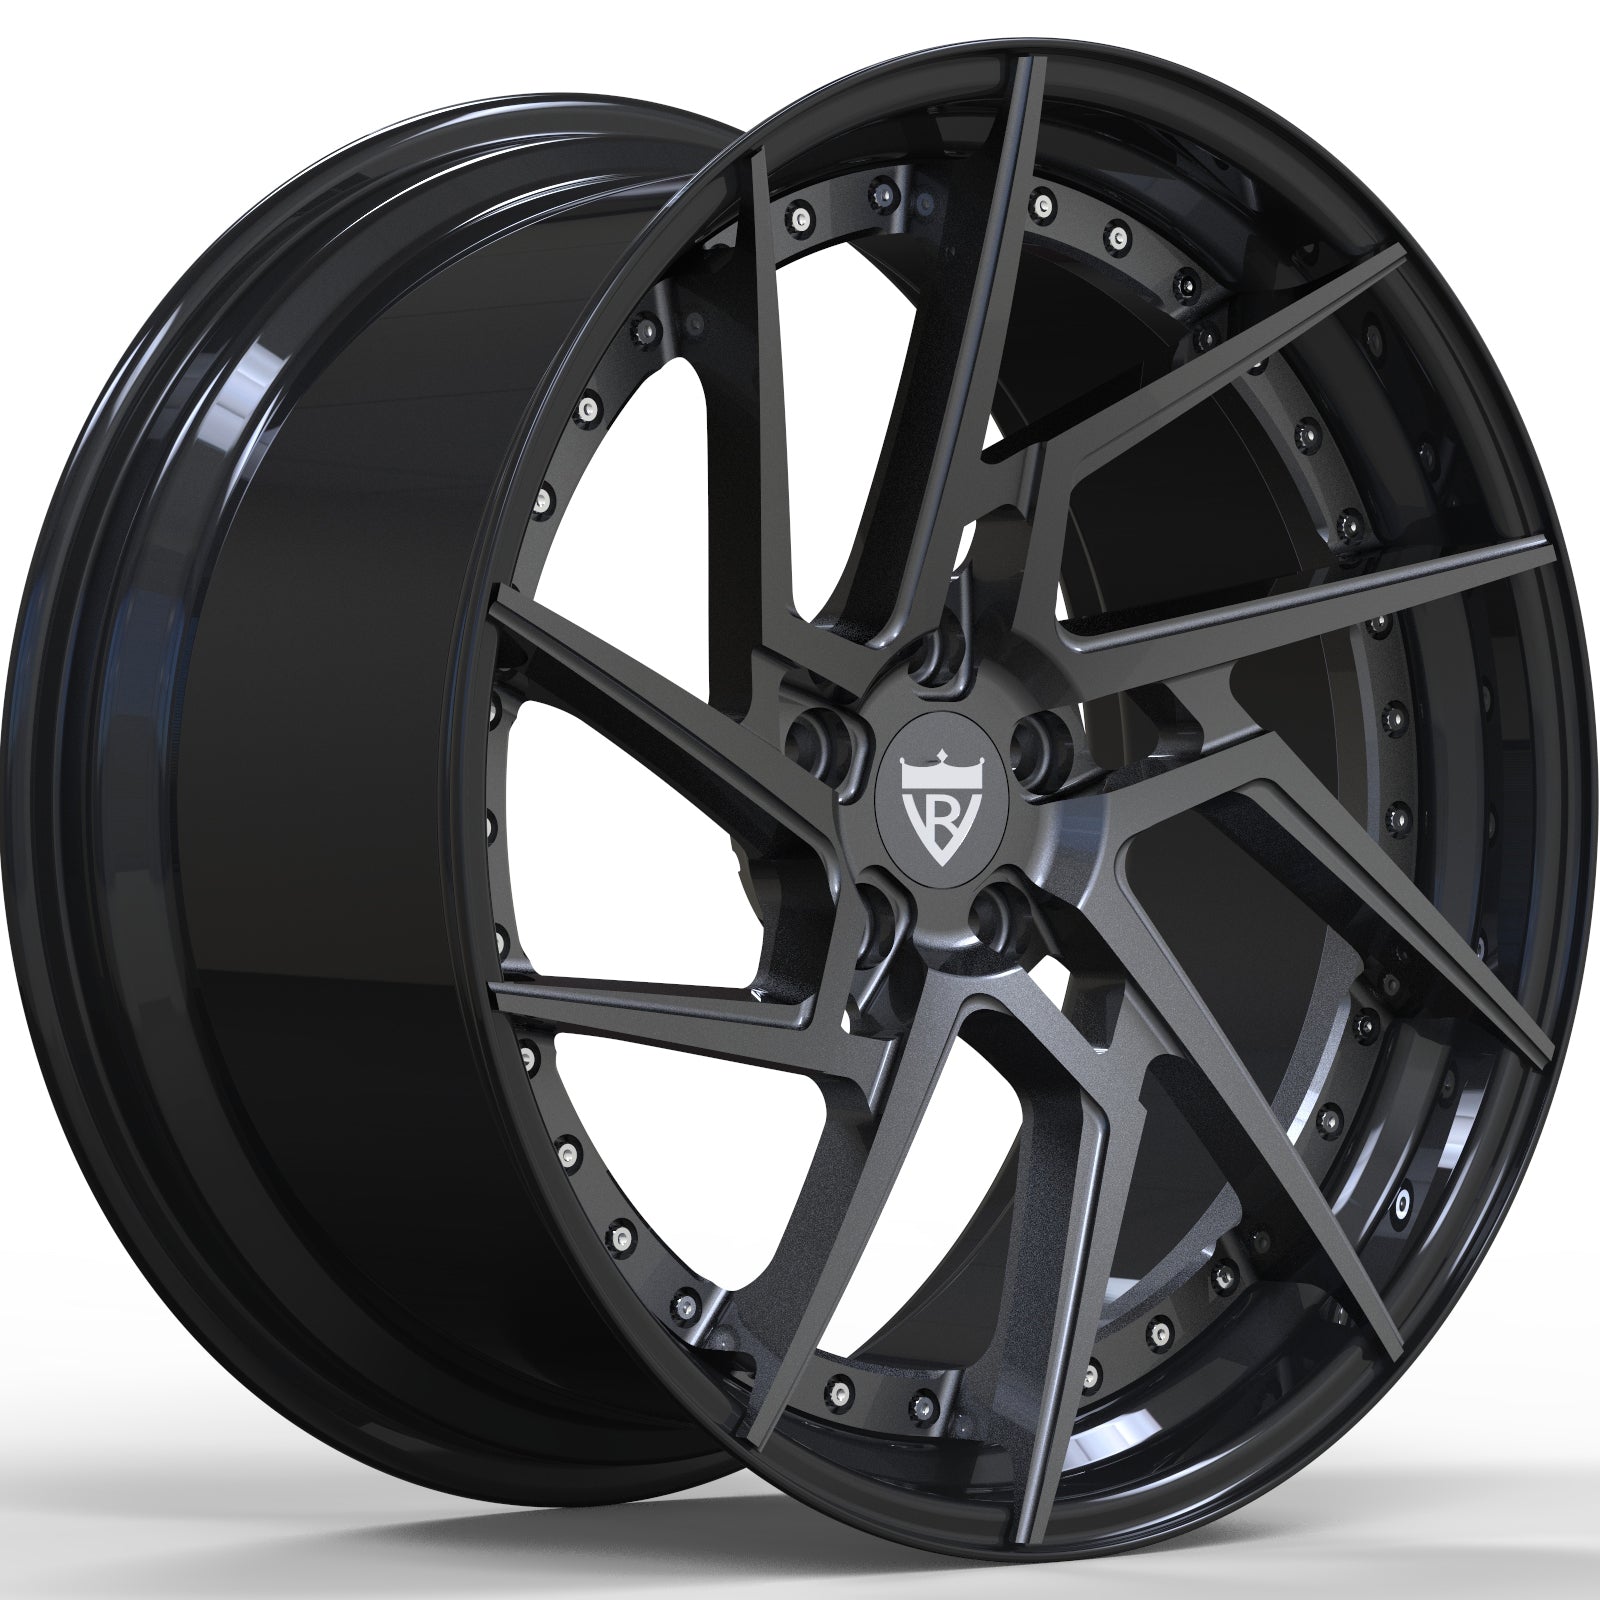 FORD MUSTANG A041 FORGED WHEELS SERIES: RV-MF041 - RVRN WHEELS